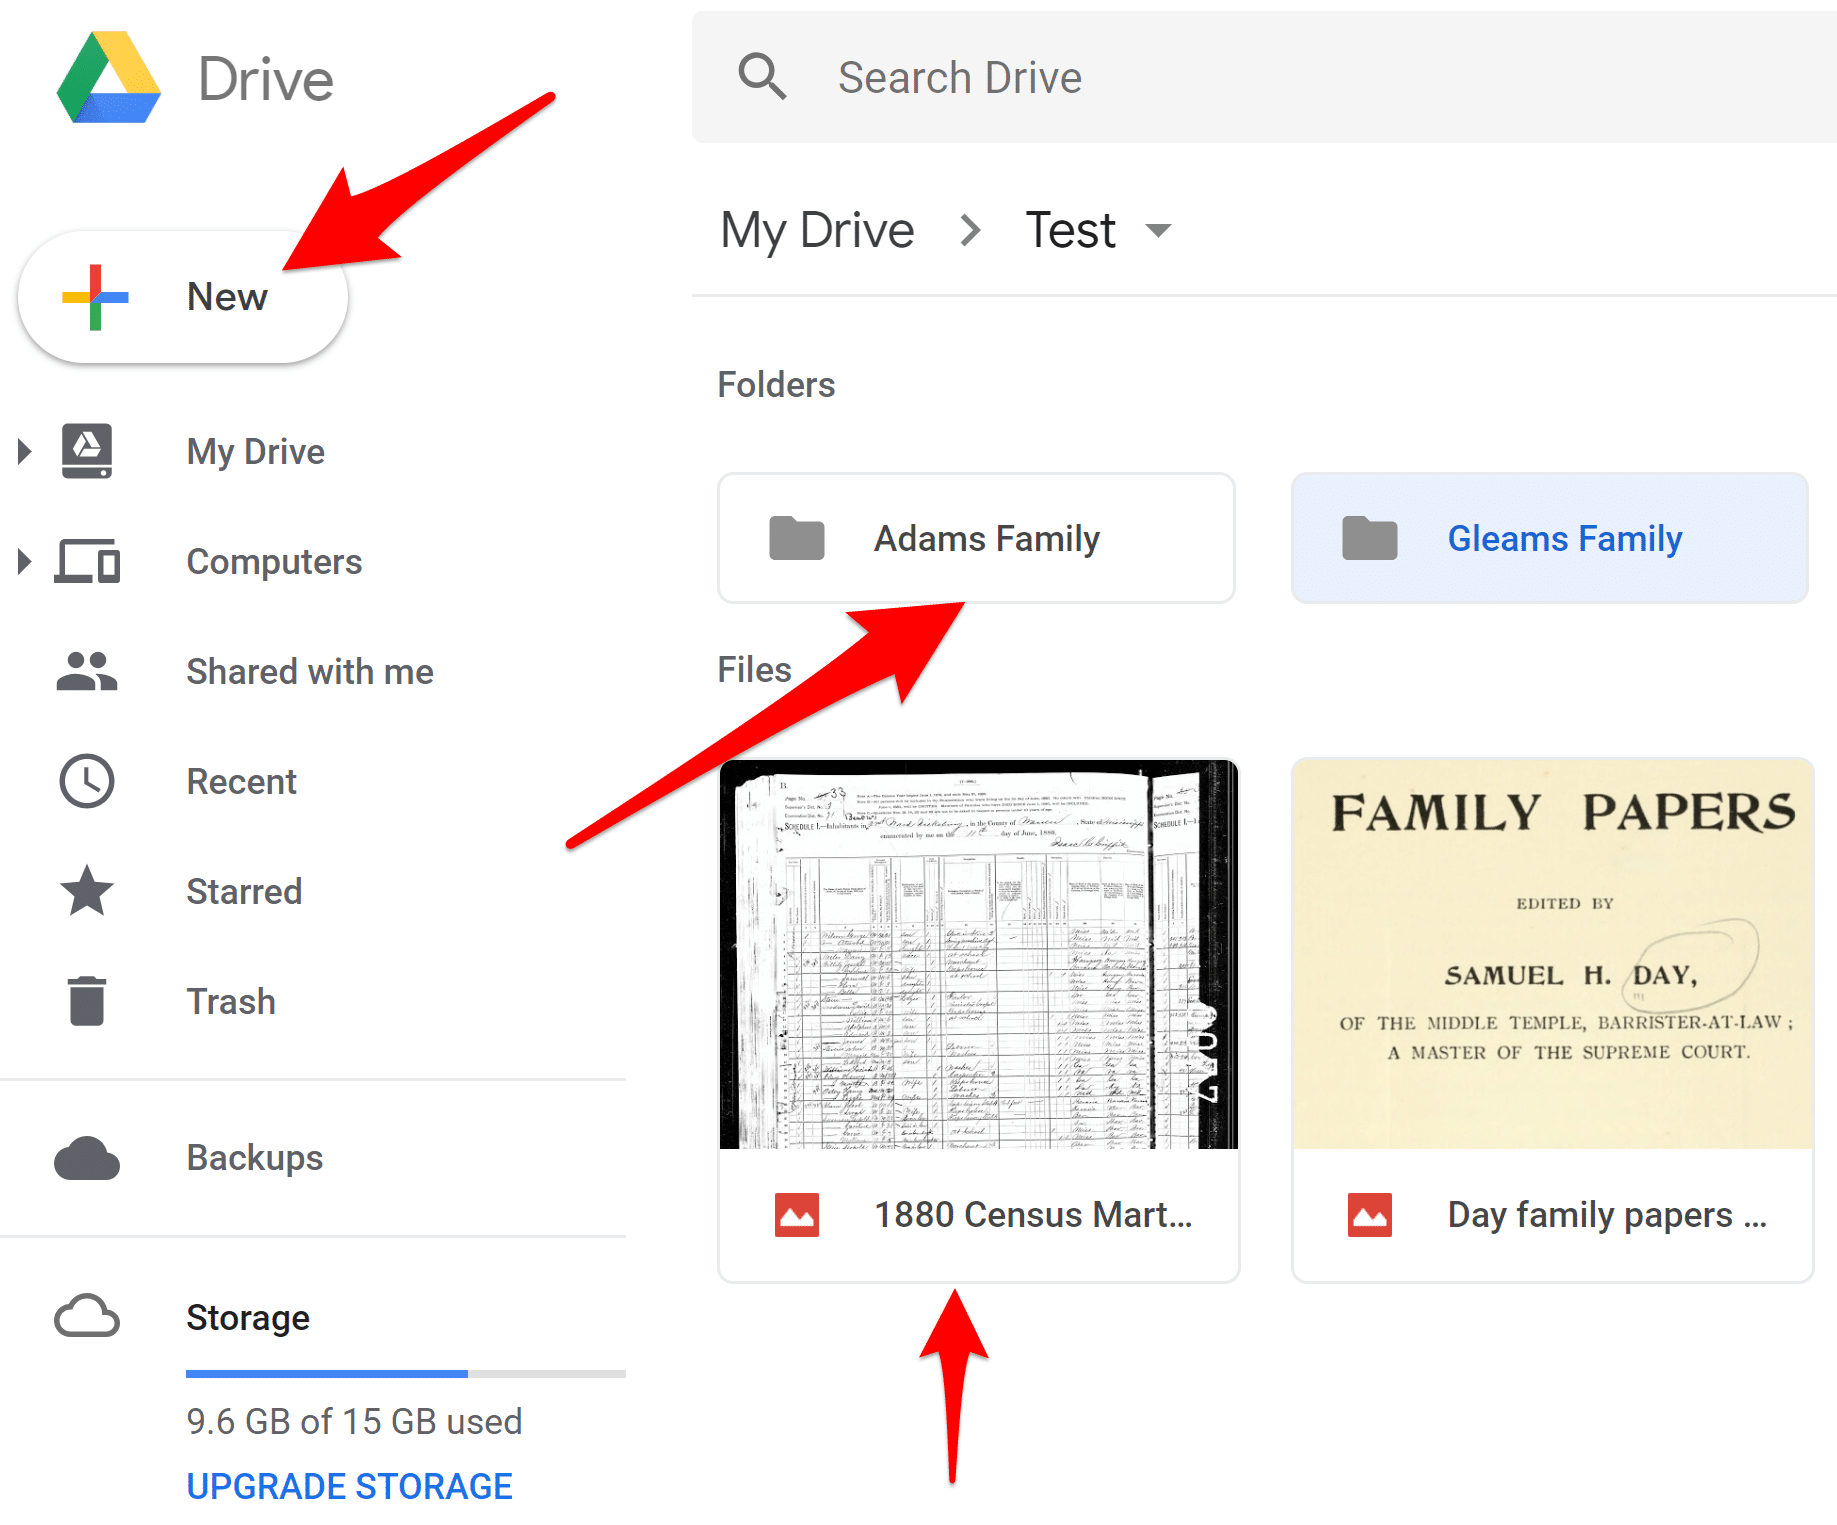 Upload Files and Create Subfolders for Genealogy Records on Google Drive